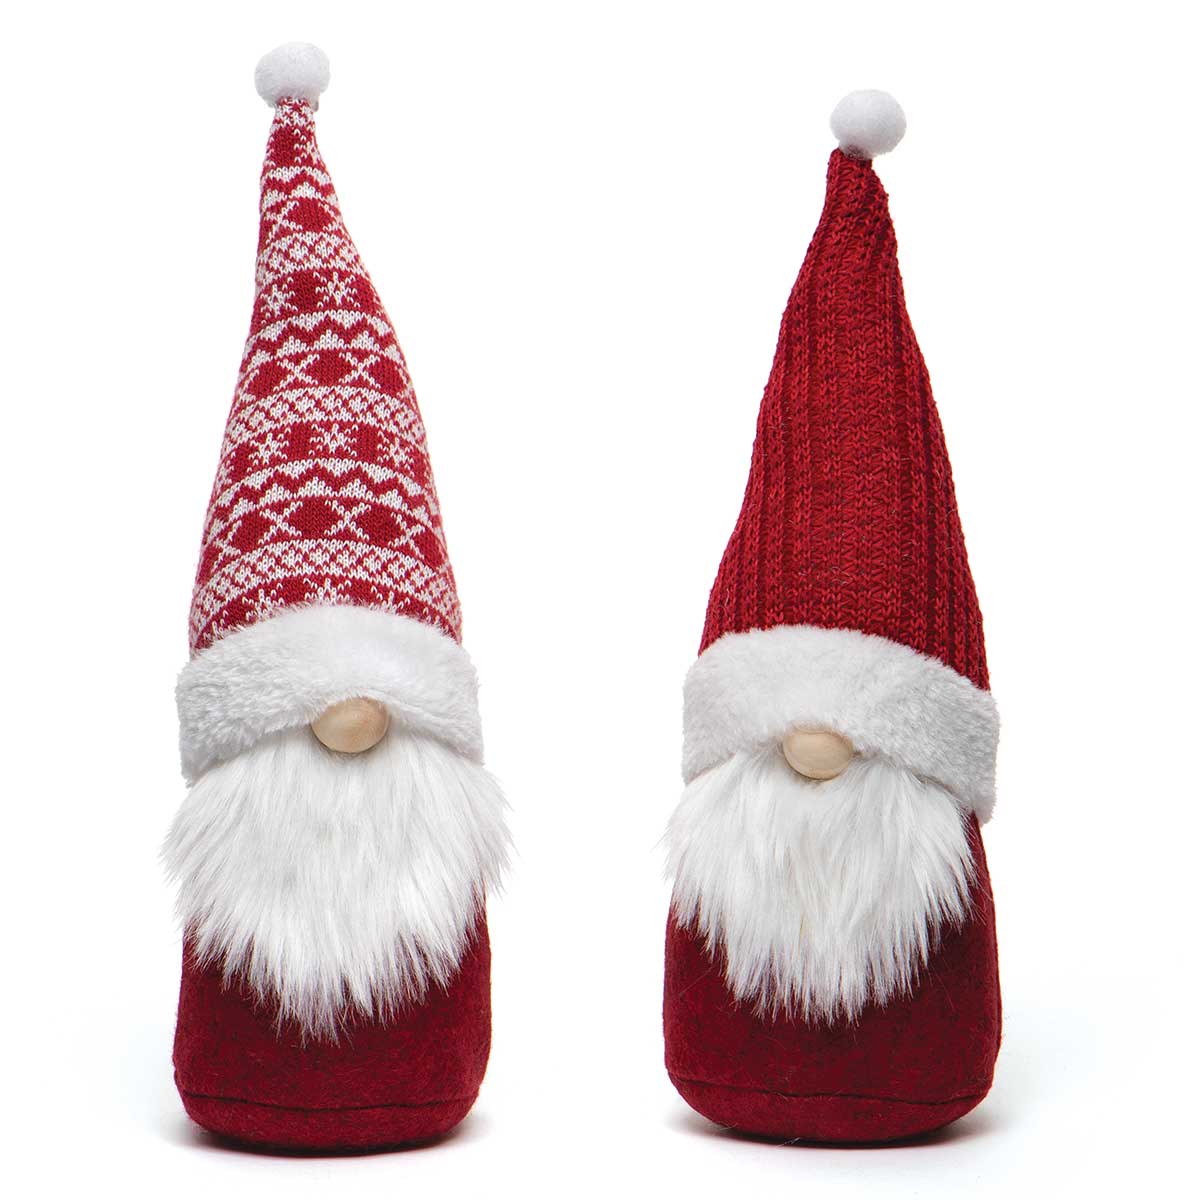 HOLIDAY GNOME RED/WHITE WITH RED/PATTERN SWEATER HAT